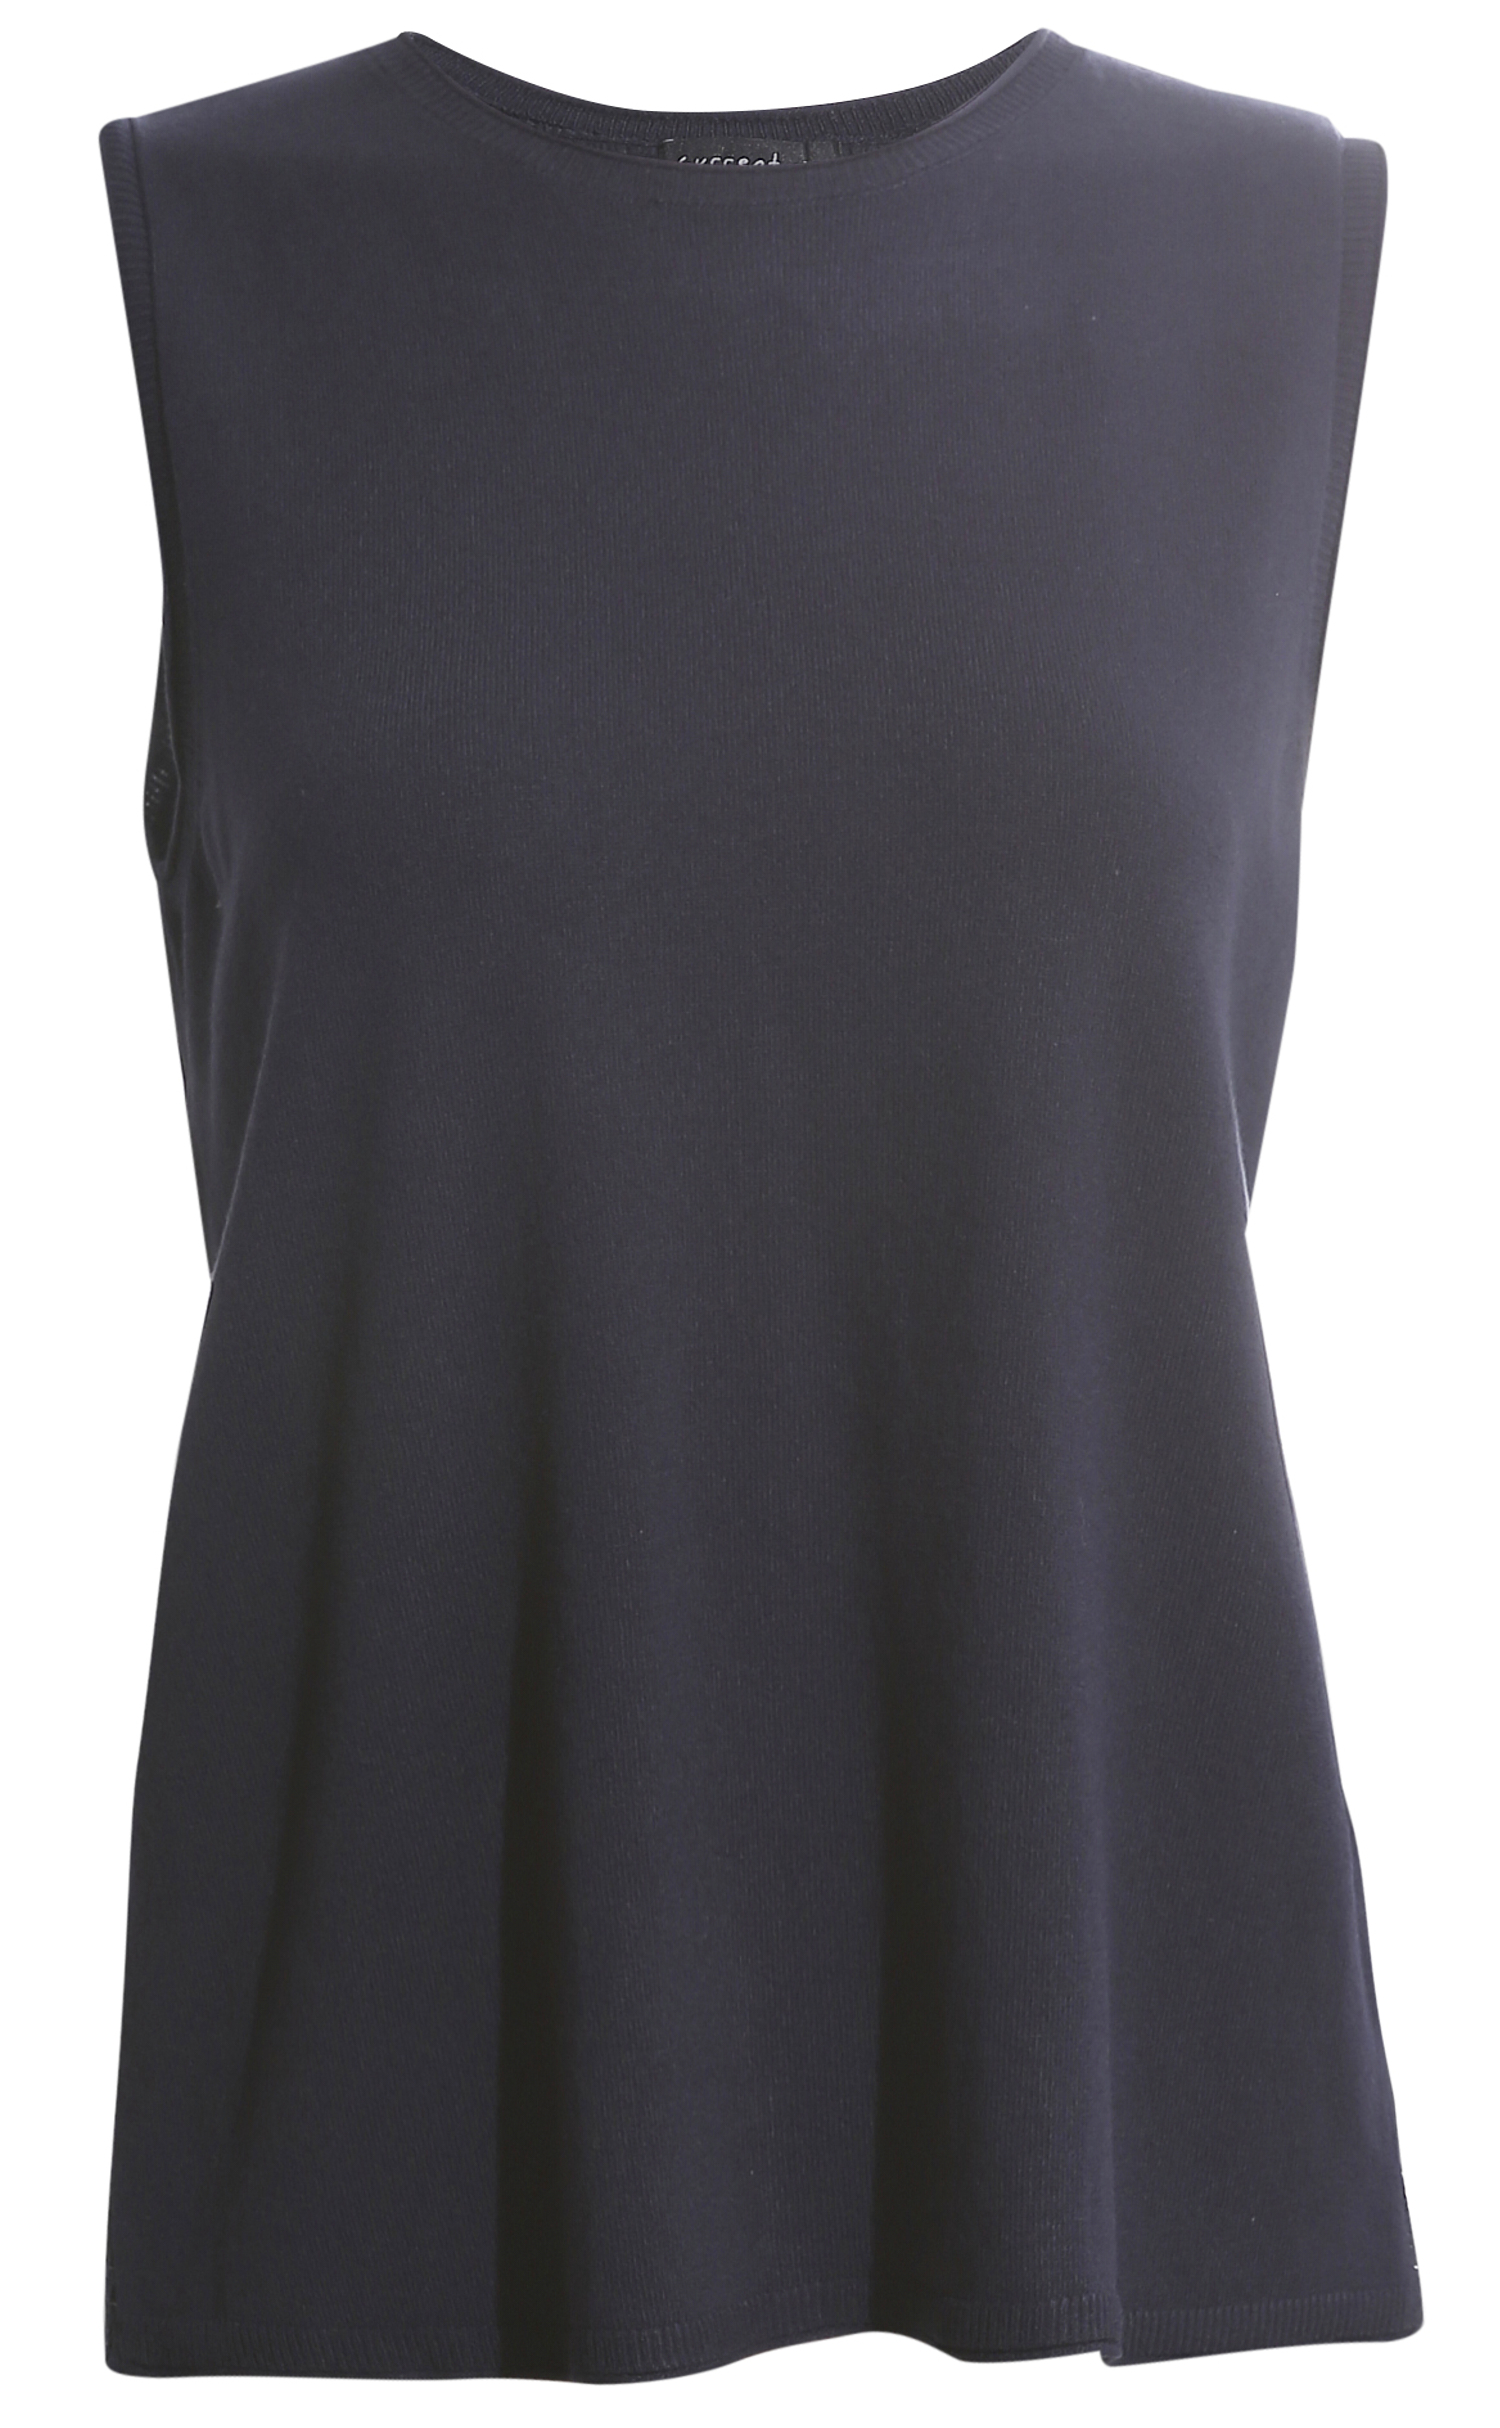 Sleeveless Sweater Top with Contrast Back